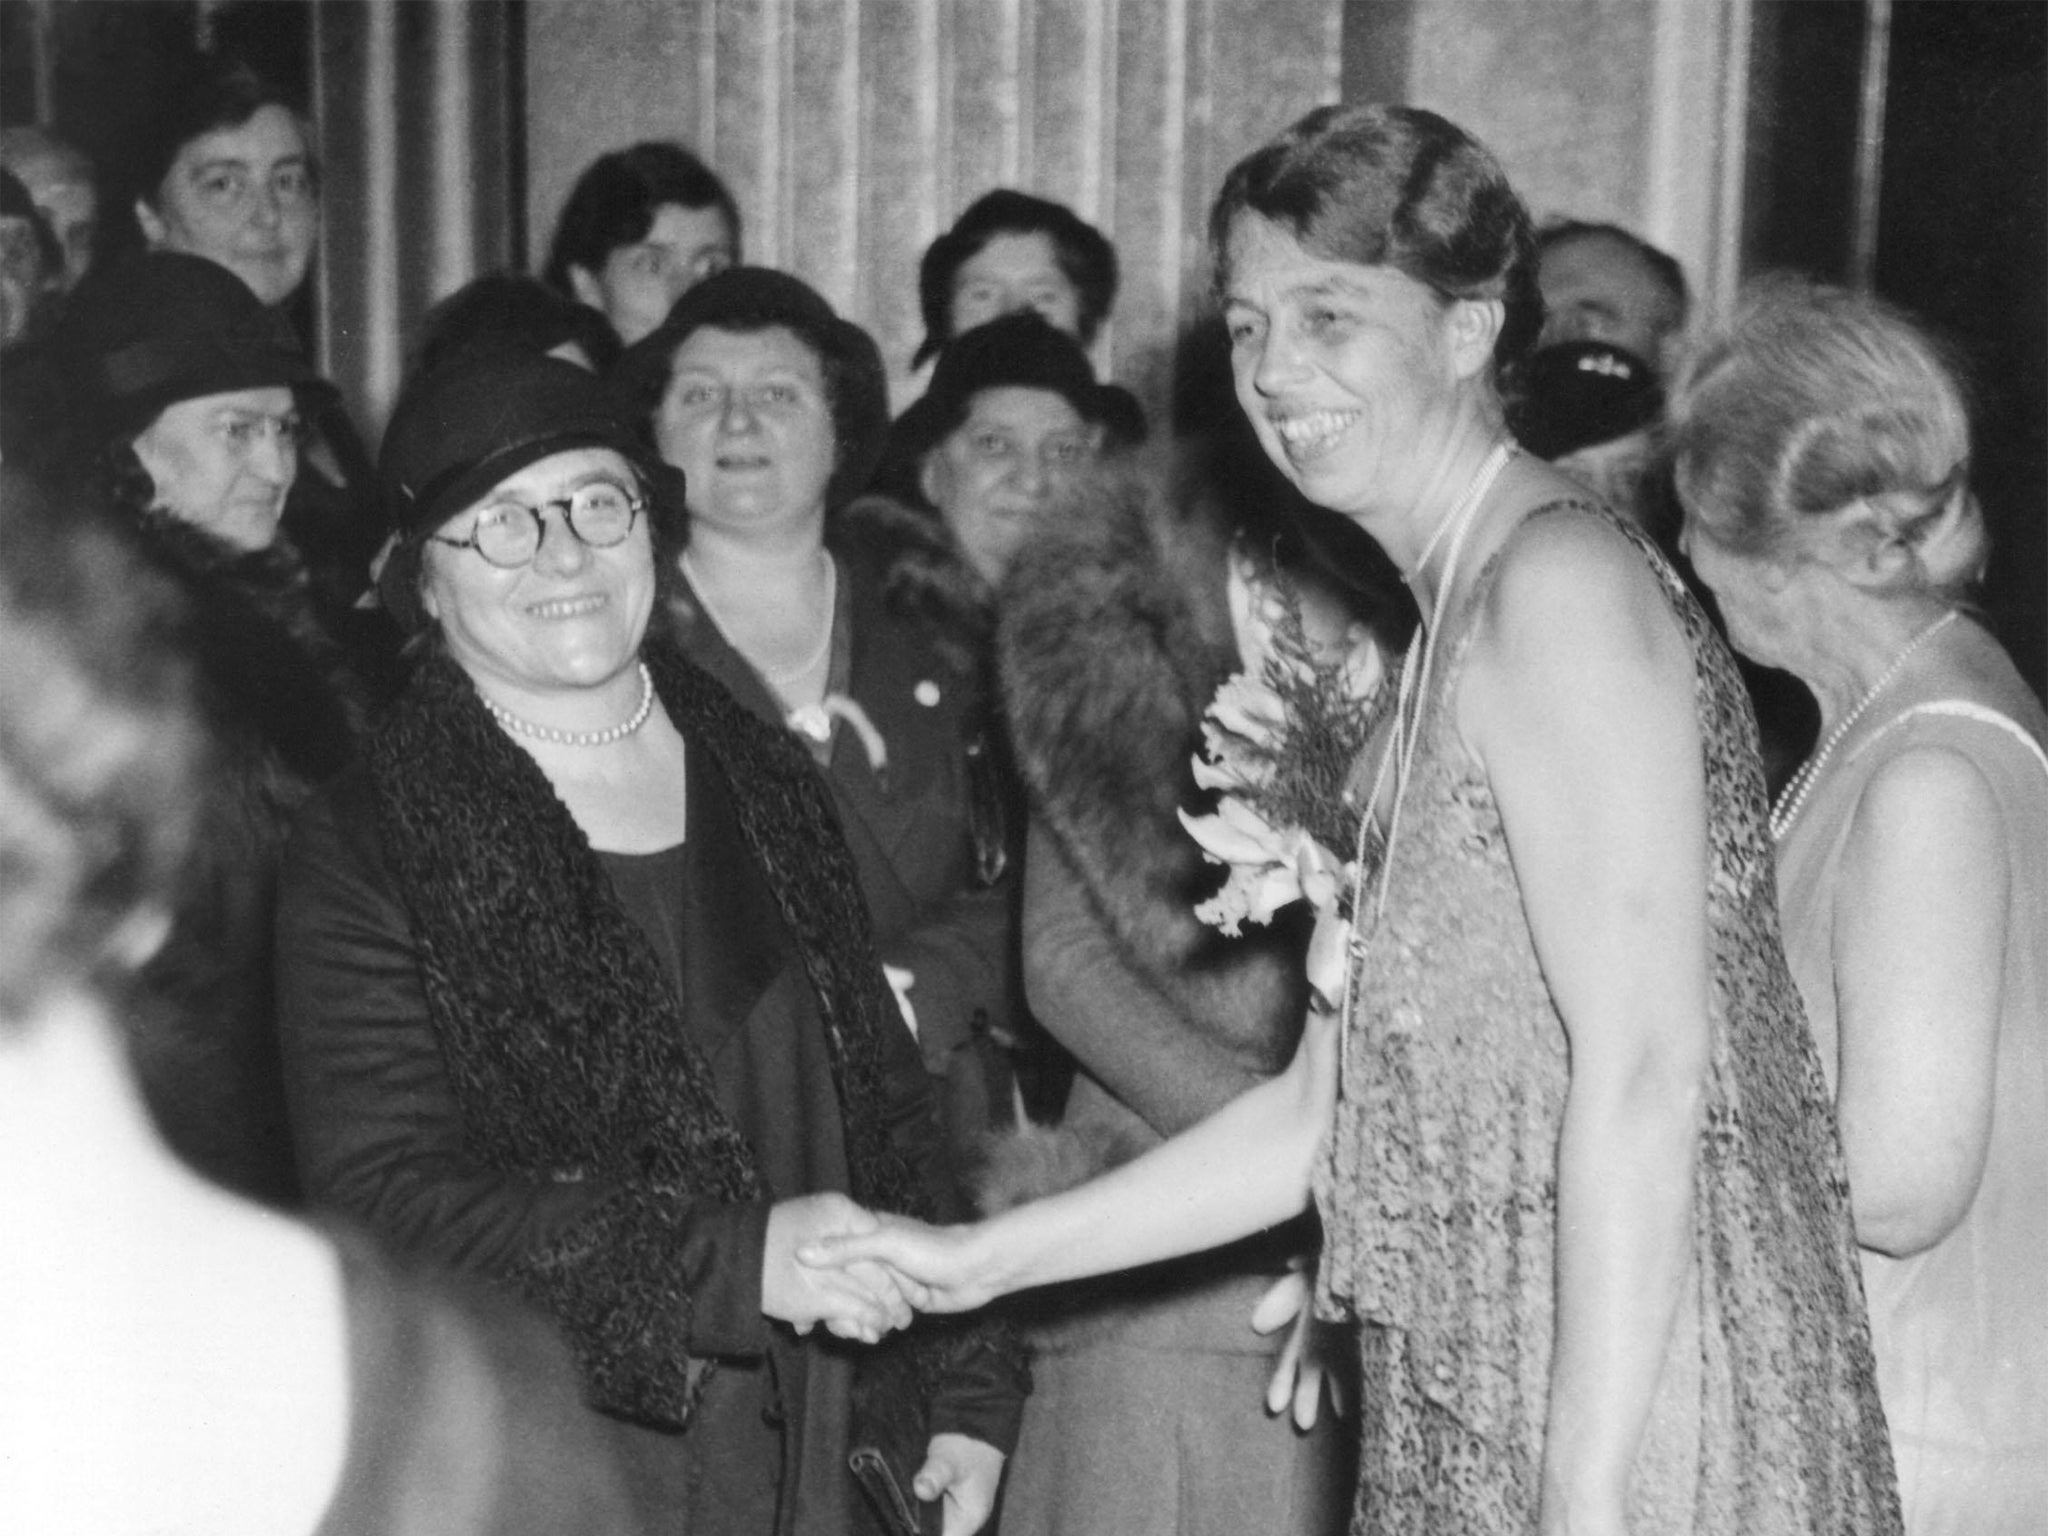 Eleanor Roosevelt greeting women in the Panhellenic Building